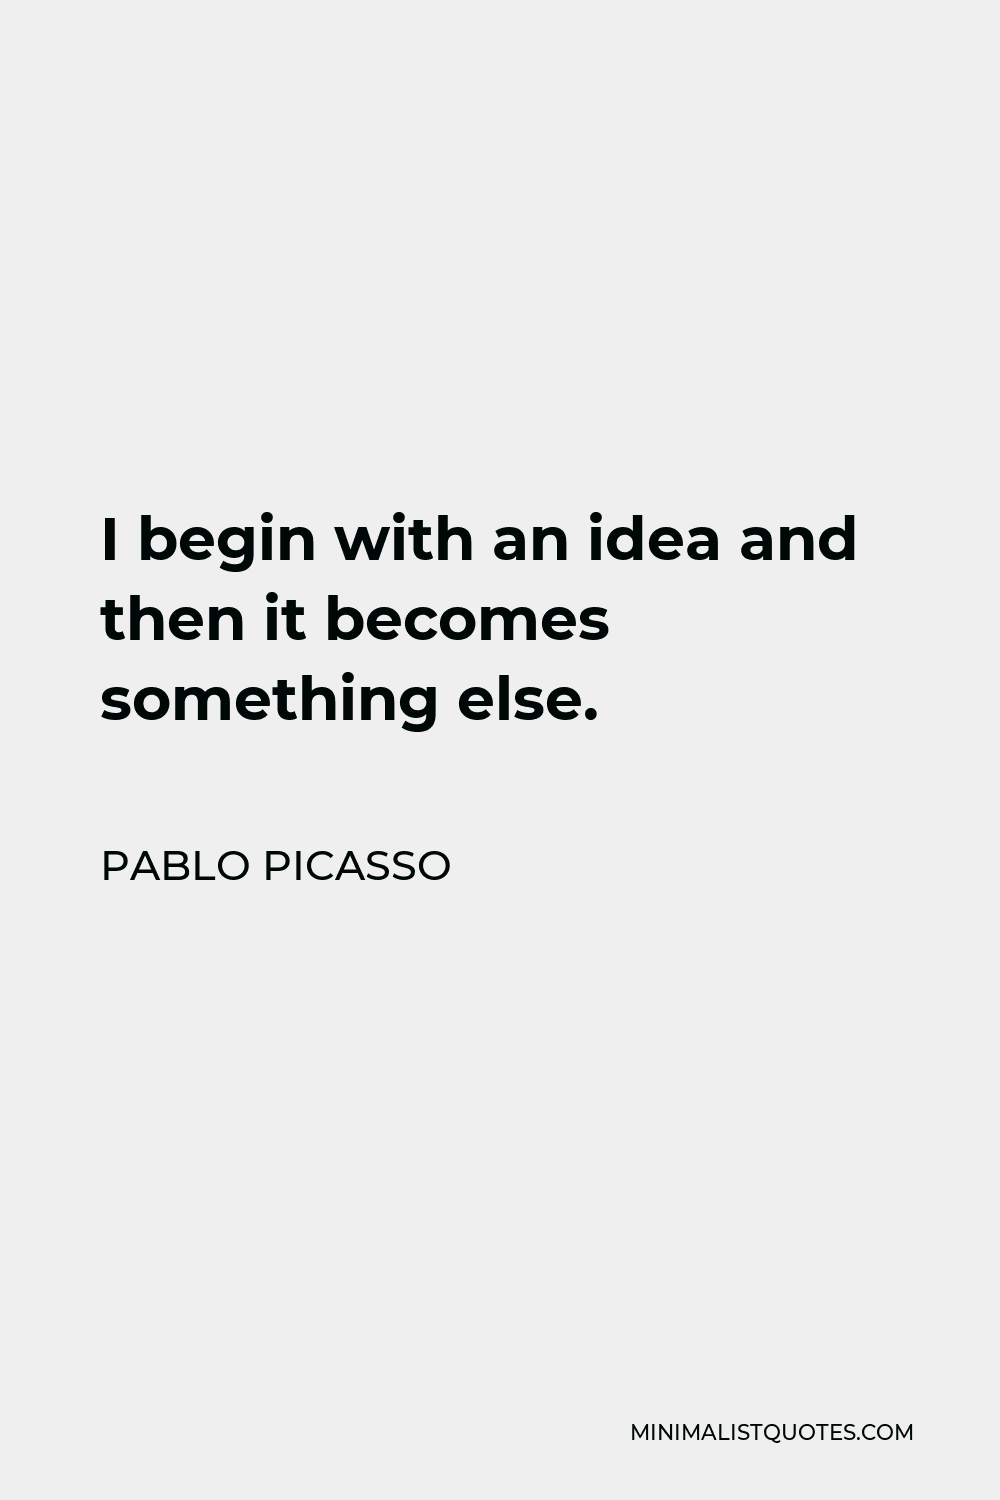 Pablo Picasso Quote - I begin with an idea and then it becomes something else.